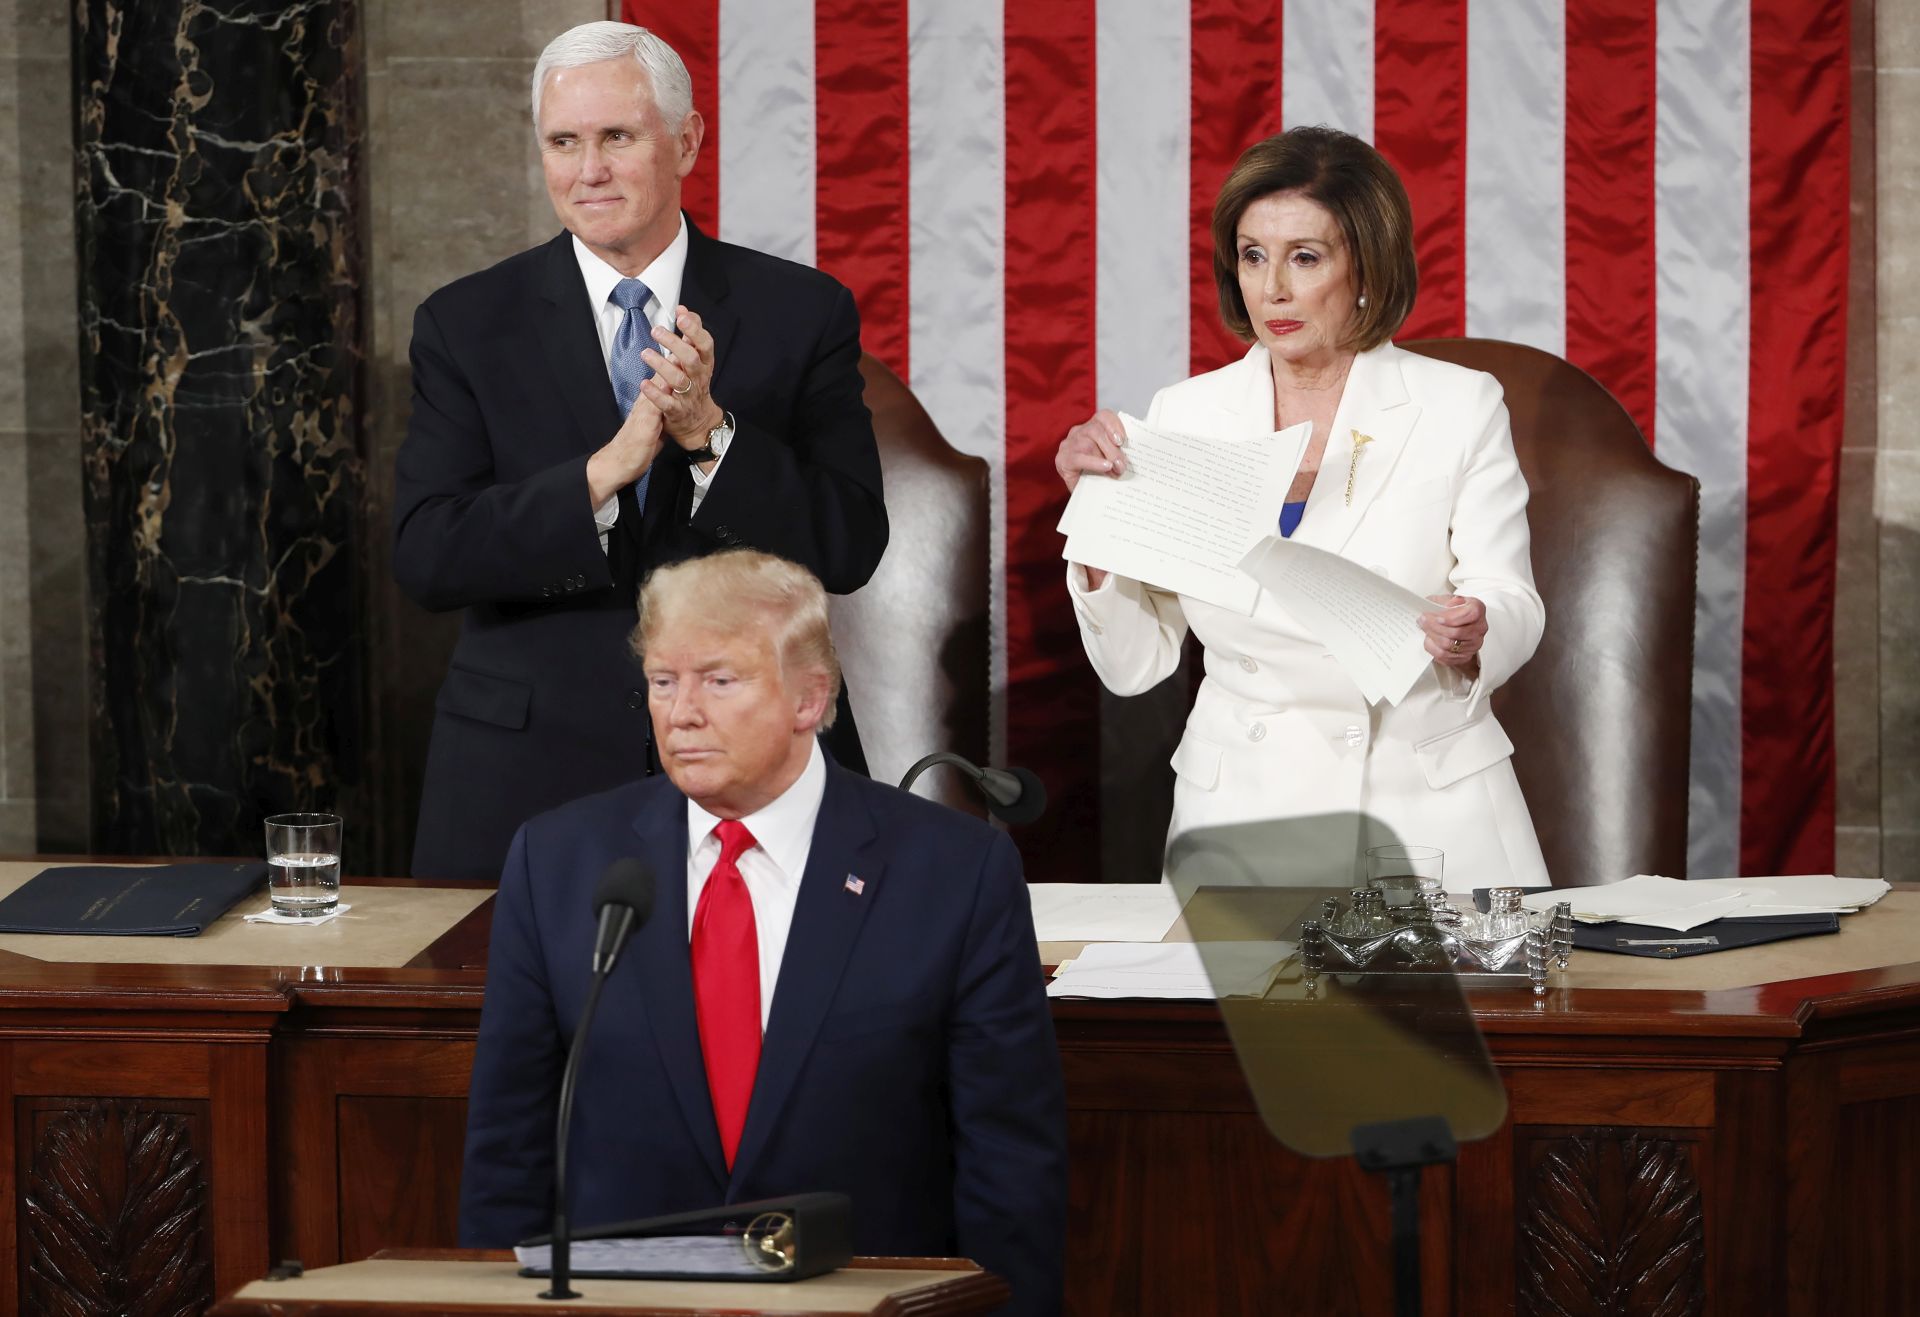 epa08193739 Speaker of the House Nancy Pelosi  (R) tears up a copy of US President Donald J. Trump's State of the Union address as he concludes in front of her and Vice President Mike Pence (L) aduring a joint session of congress in the House chamber of the US Capitol in Washington, DC, USA 04 February 2020. President Trump delivers his address as his impeachment trial is coming to an end with a final vote on the 2 articles of impeachment scheduled for 05 February.  EPA/SHAWN THEW